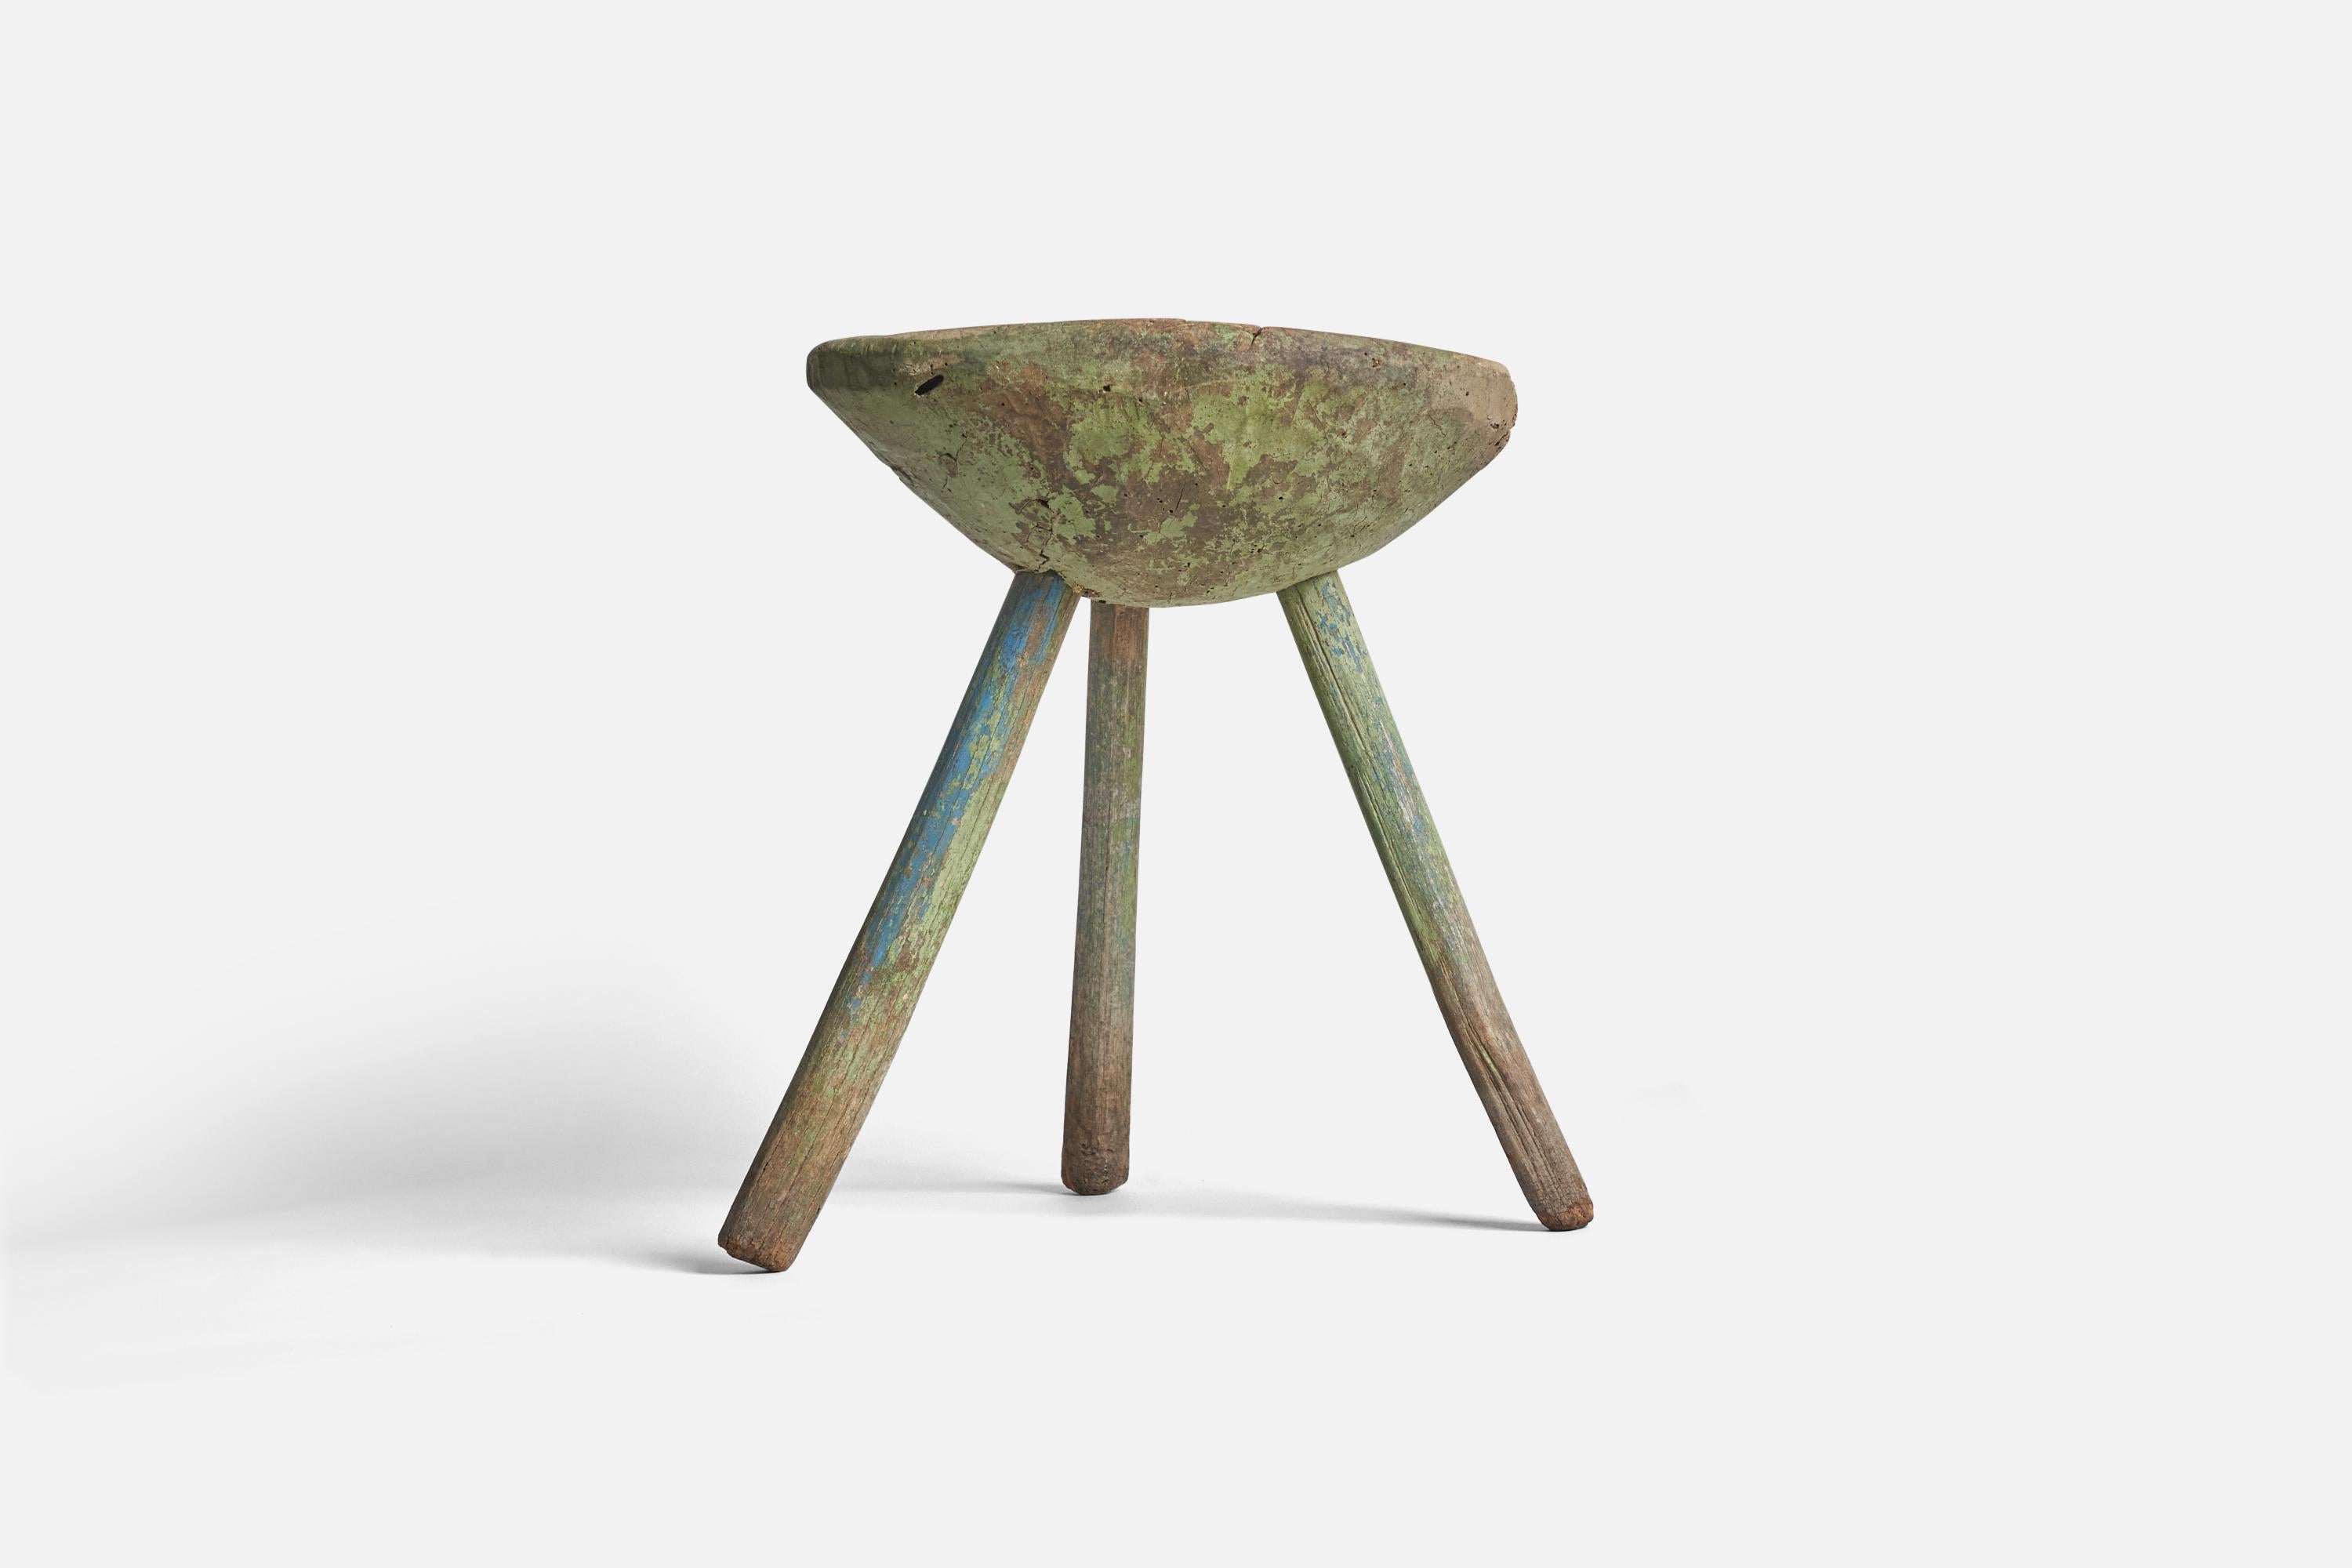 A farmers green-painted wooden stool produced in Sweden, early 19th century. 